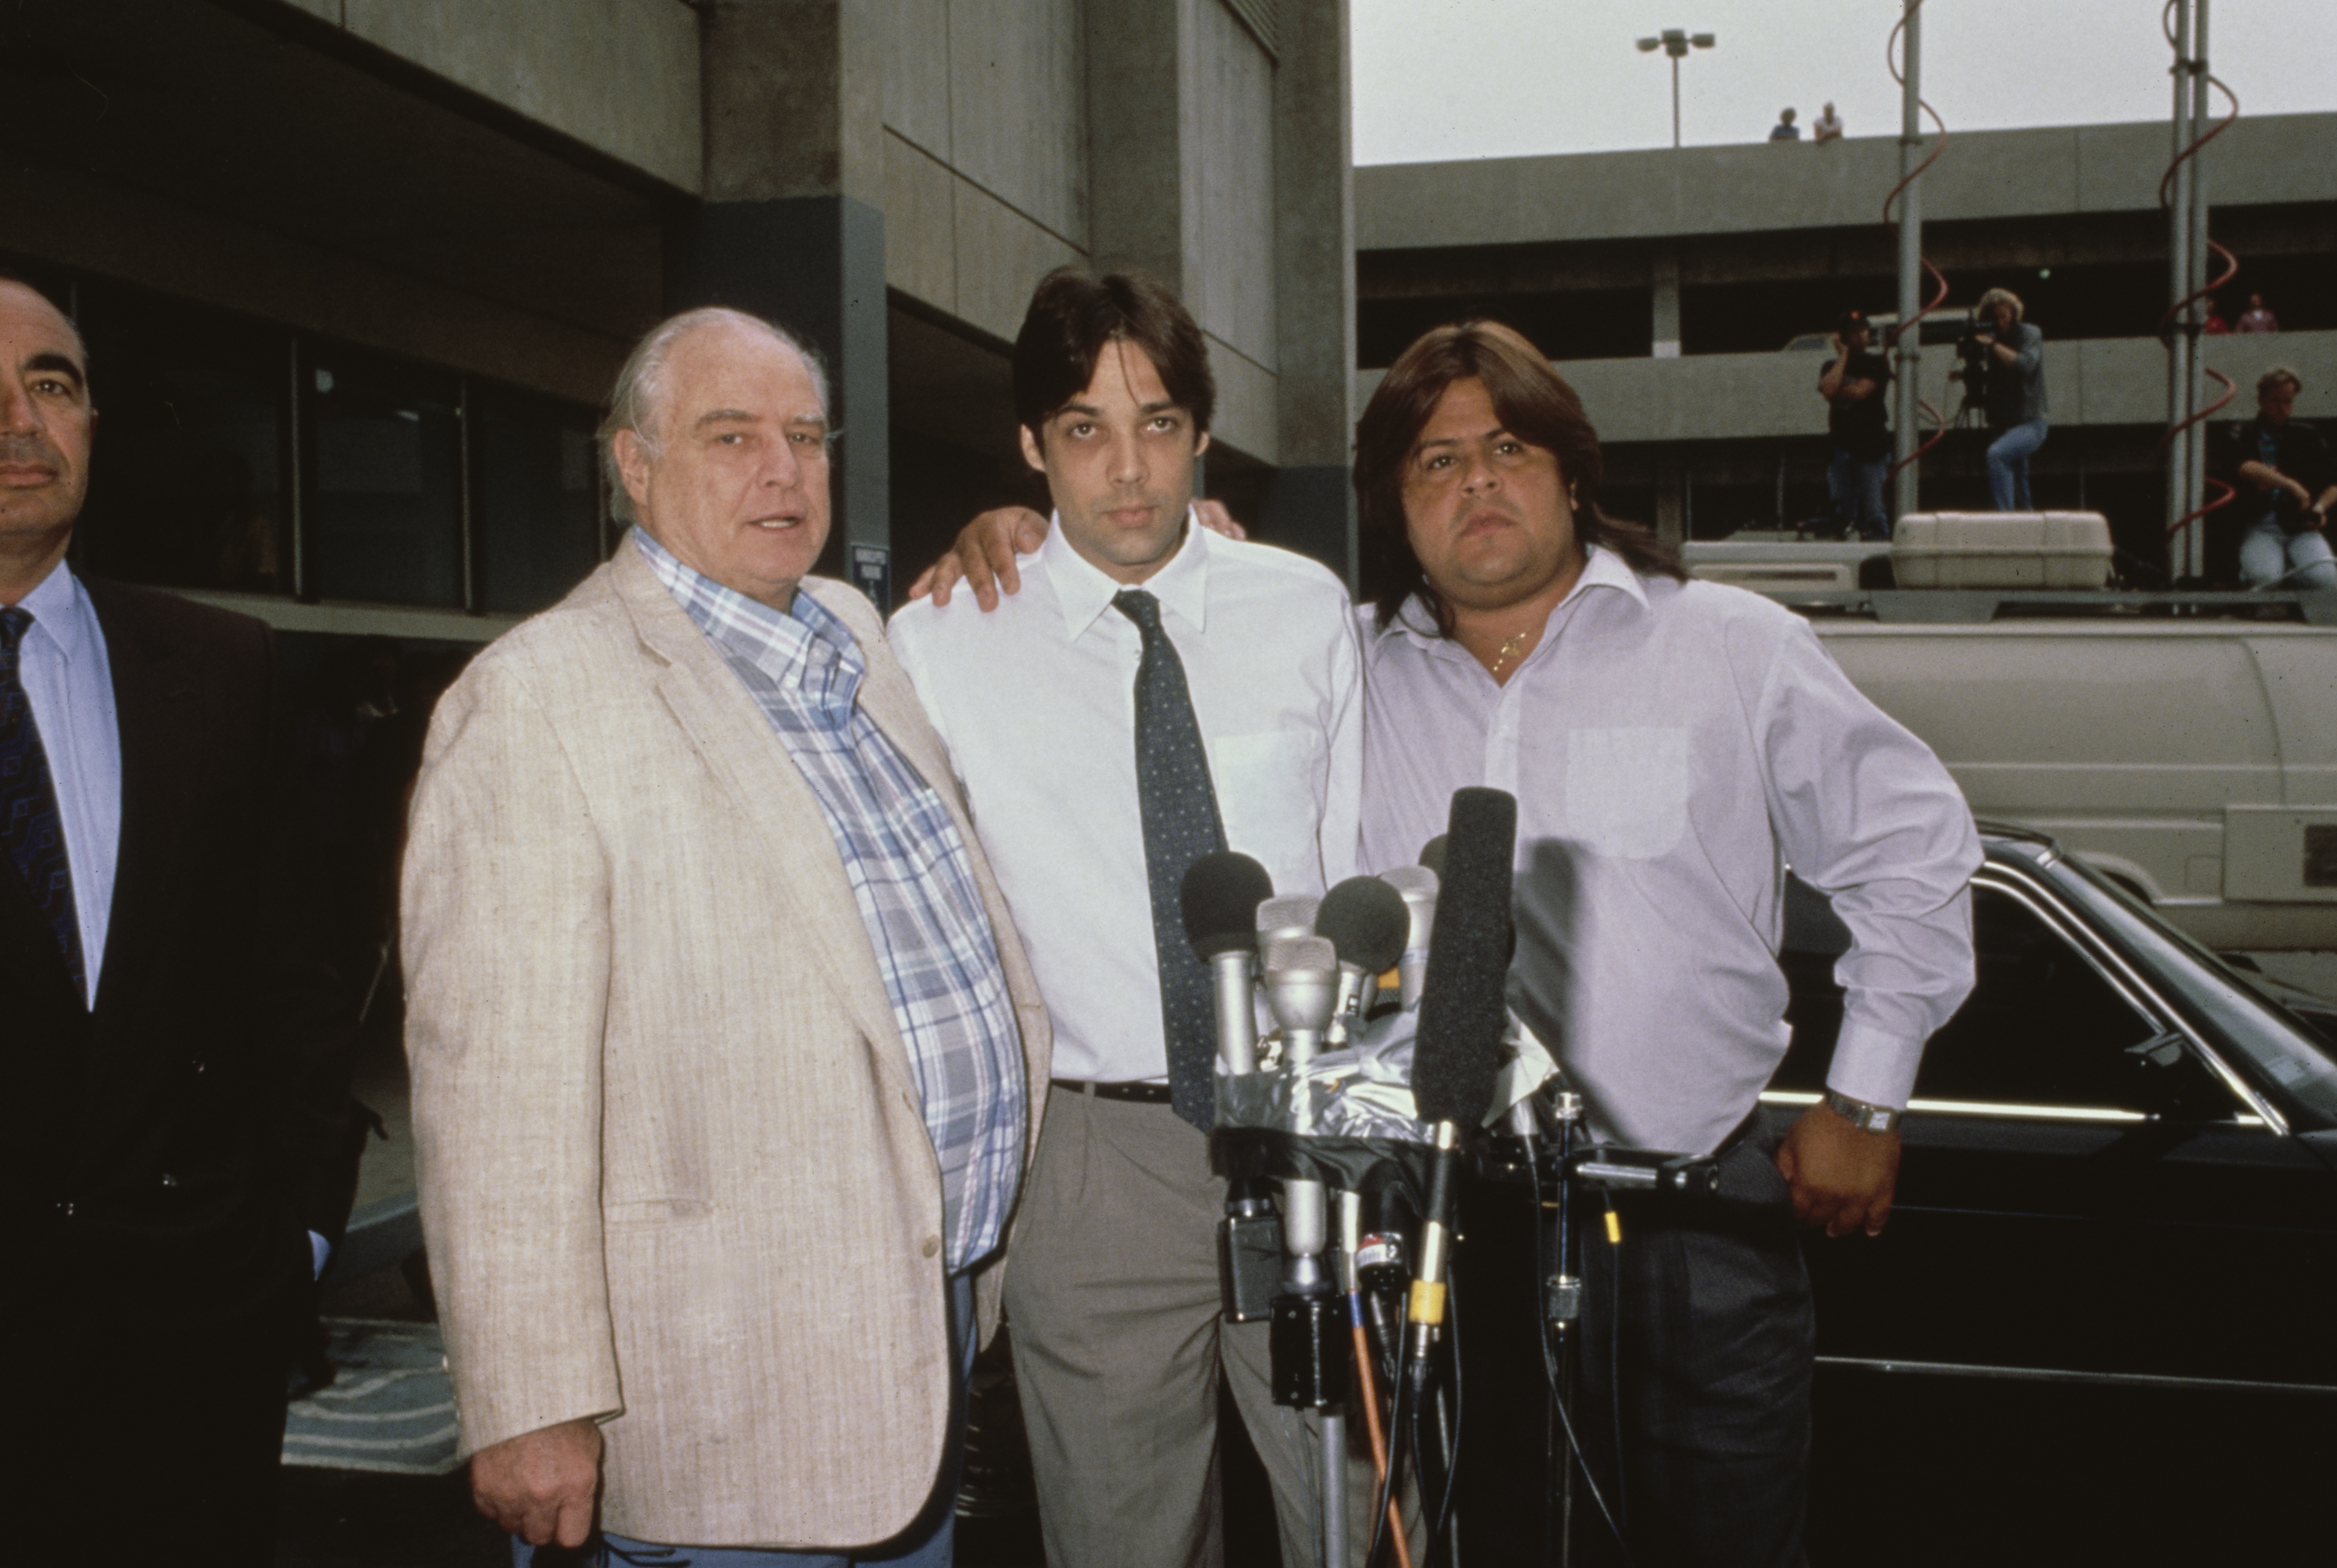 Marlon Brando and his sons Christian Brando and Miko Brando at a press conference at the Los Angeles County Jail in Los Angeles, California on August 15, 1990 | Source: Getty Images